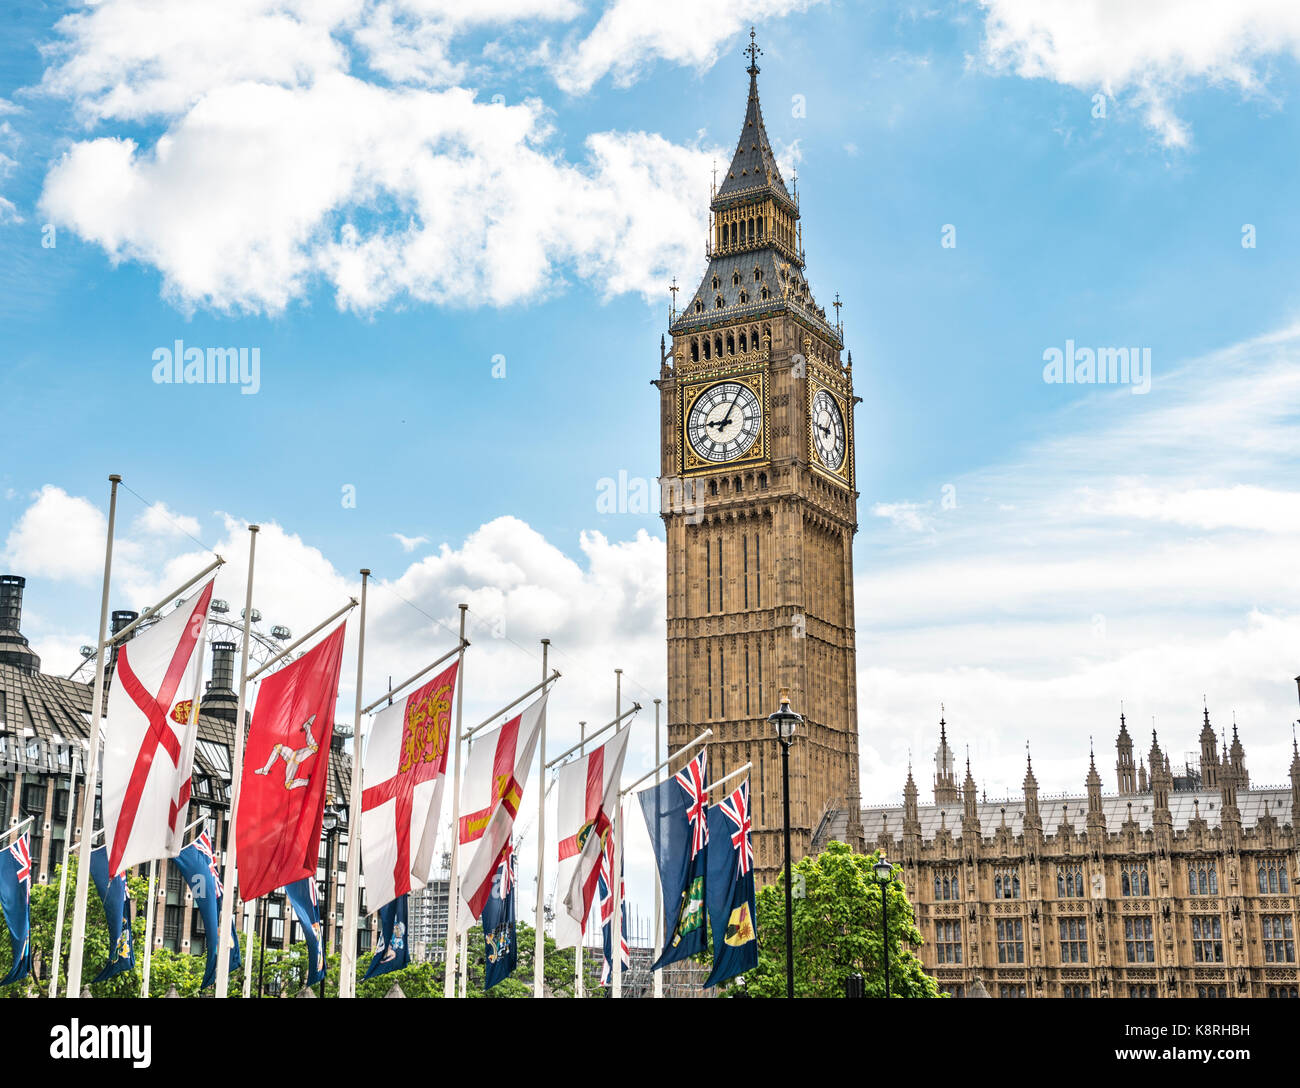 Flags with Big Ben, London, England, Great Britain Stock Photo